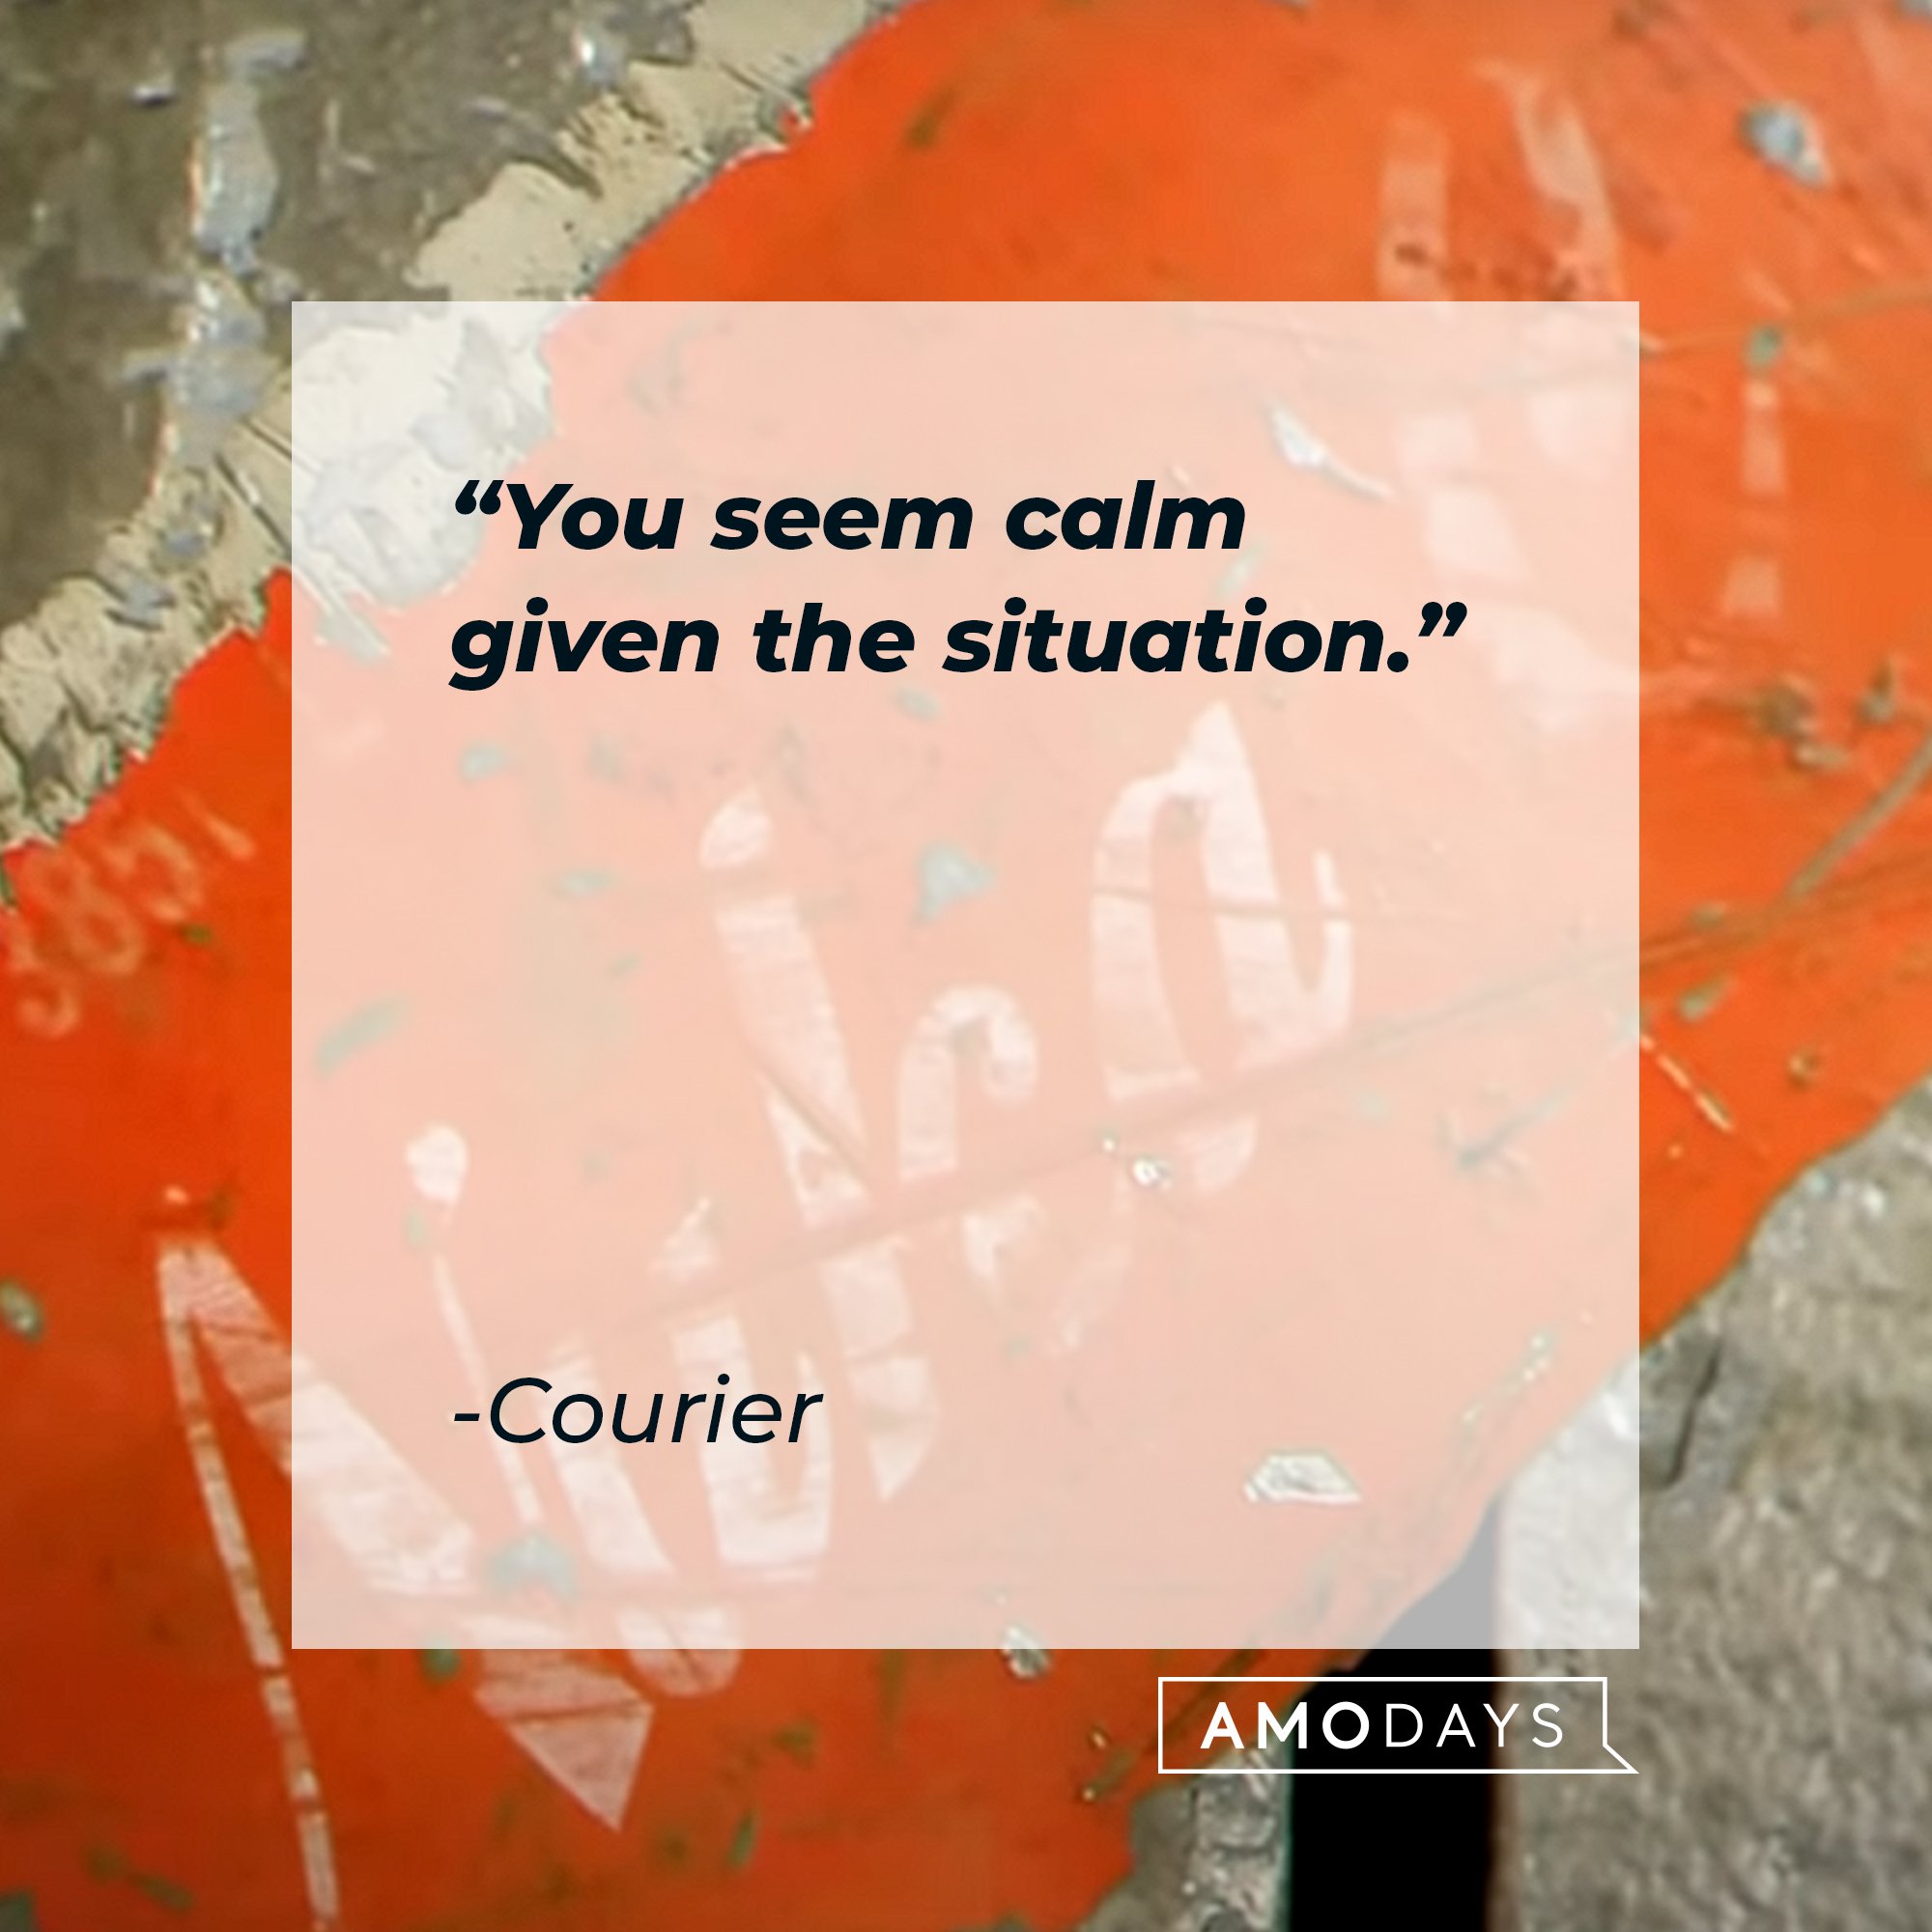  Courier’s quote: "You seem calm given the situation." | Image: AmoDays